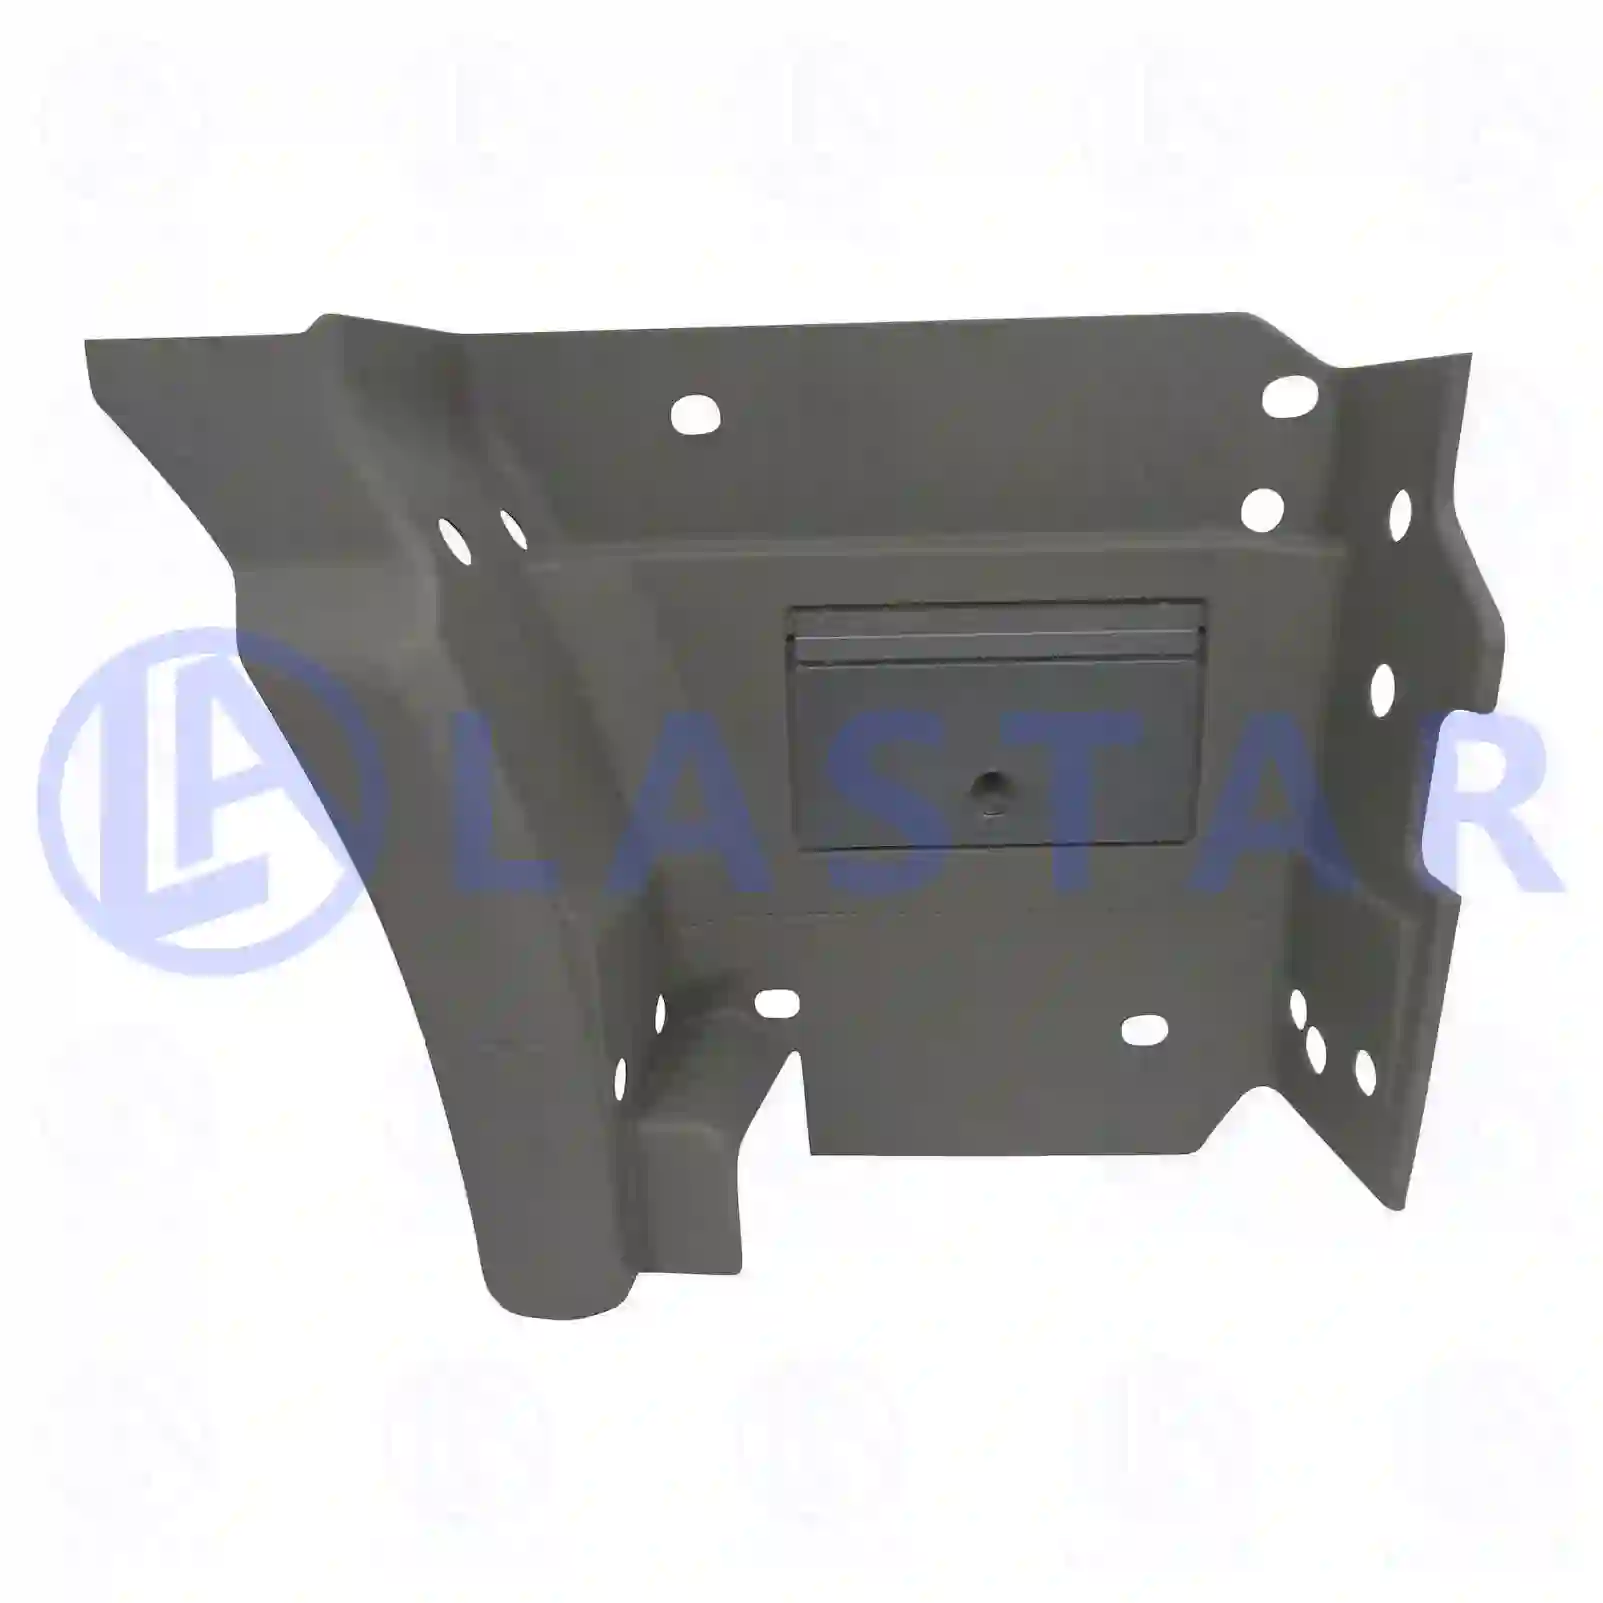 Step well case, right, 77719051, 9416603701, 94166037017C72 ||  77719051 Lastar Spare Part | Truck Spare Parts, Auotomotive Spare Parts Step well case, right, 77719051, 9416603701, 94166037017C72 ||  77719051 Lastar Spare Part | Truck Spare Parts, Auotomotive Spare Parts